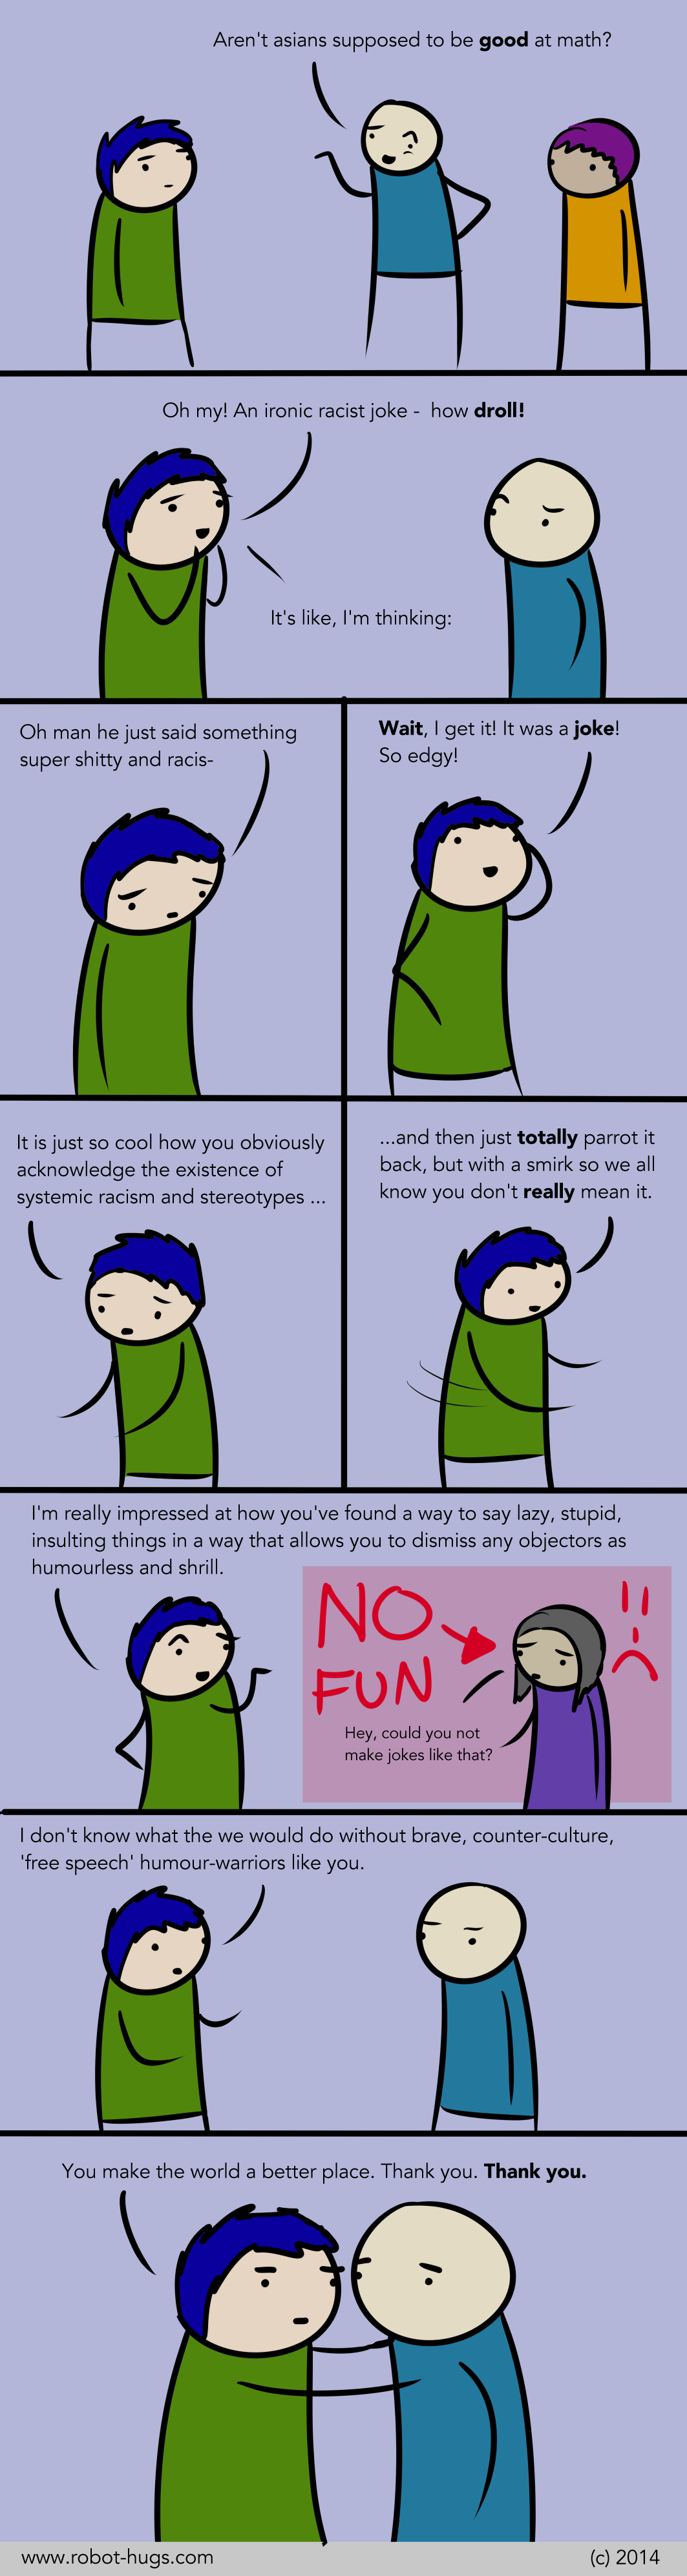 This Comic Is Way More Clever Than an Ironic Racist Joke - Everyday Feminism